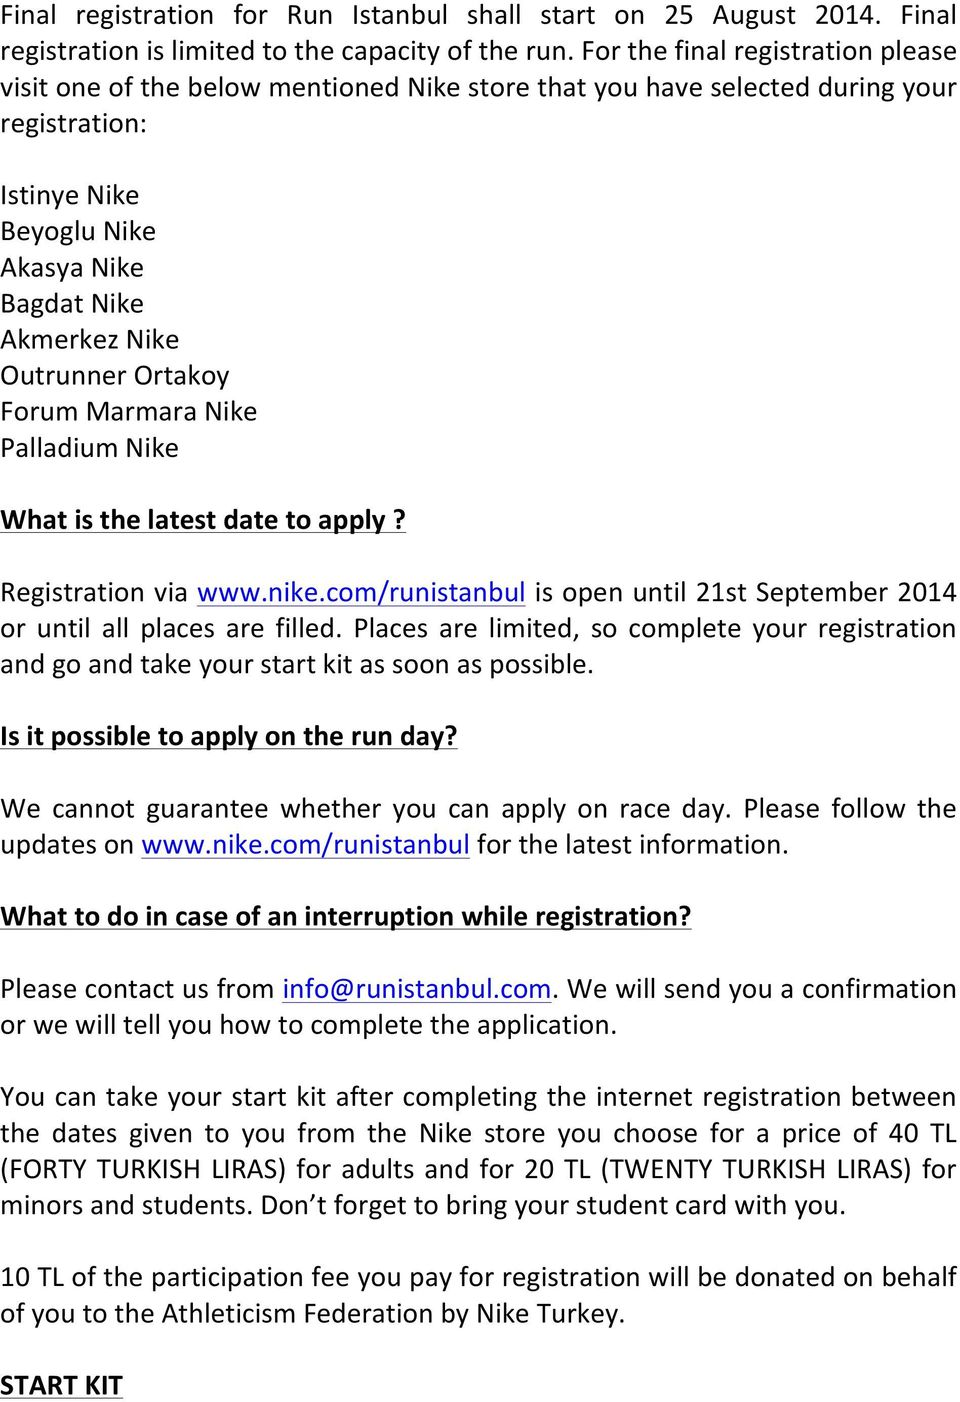 Outrunner Ortakoy Forum Marmara Nike Palladium Nike What is the latest date to apply? Registration via www.nike.com/runistanbul is open until 21st September 2014 or until all places are filled.